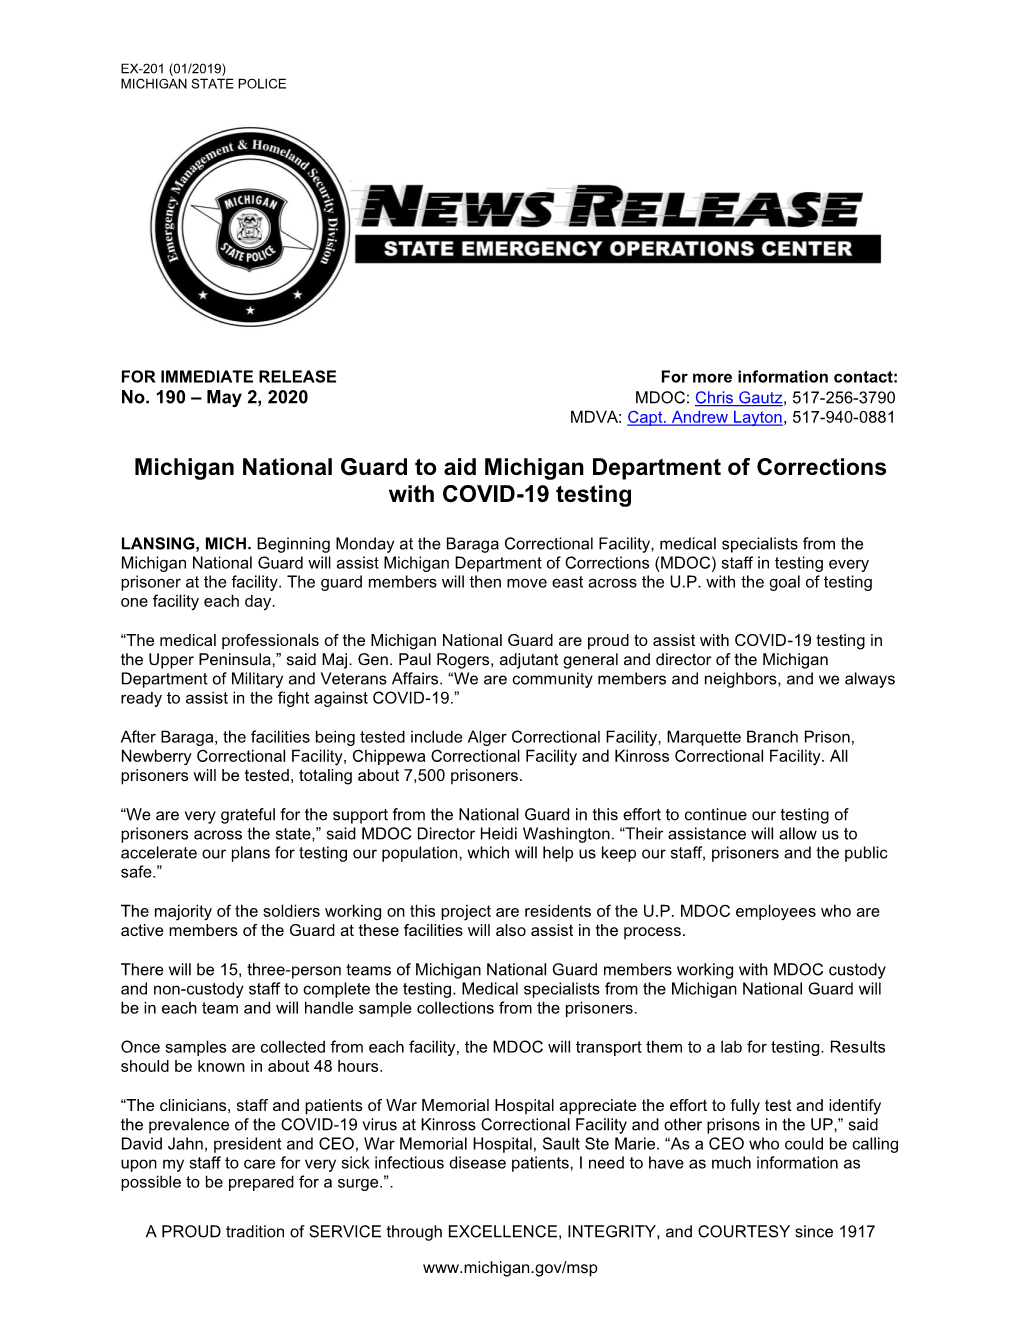 Michigan National Guard to Aid Michigan Department of Corrections with COVID-19 Testing